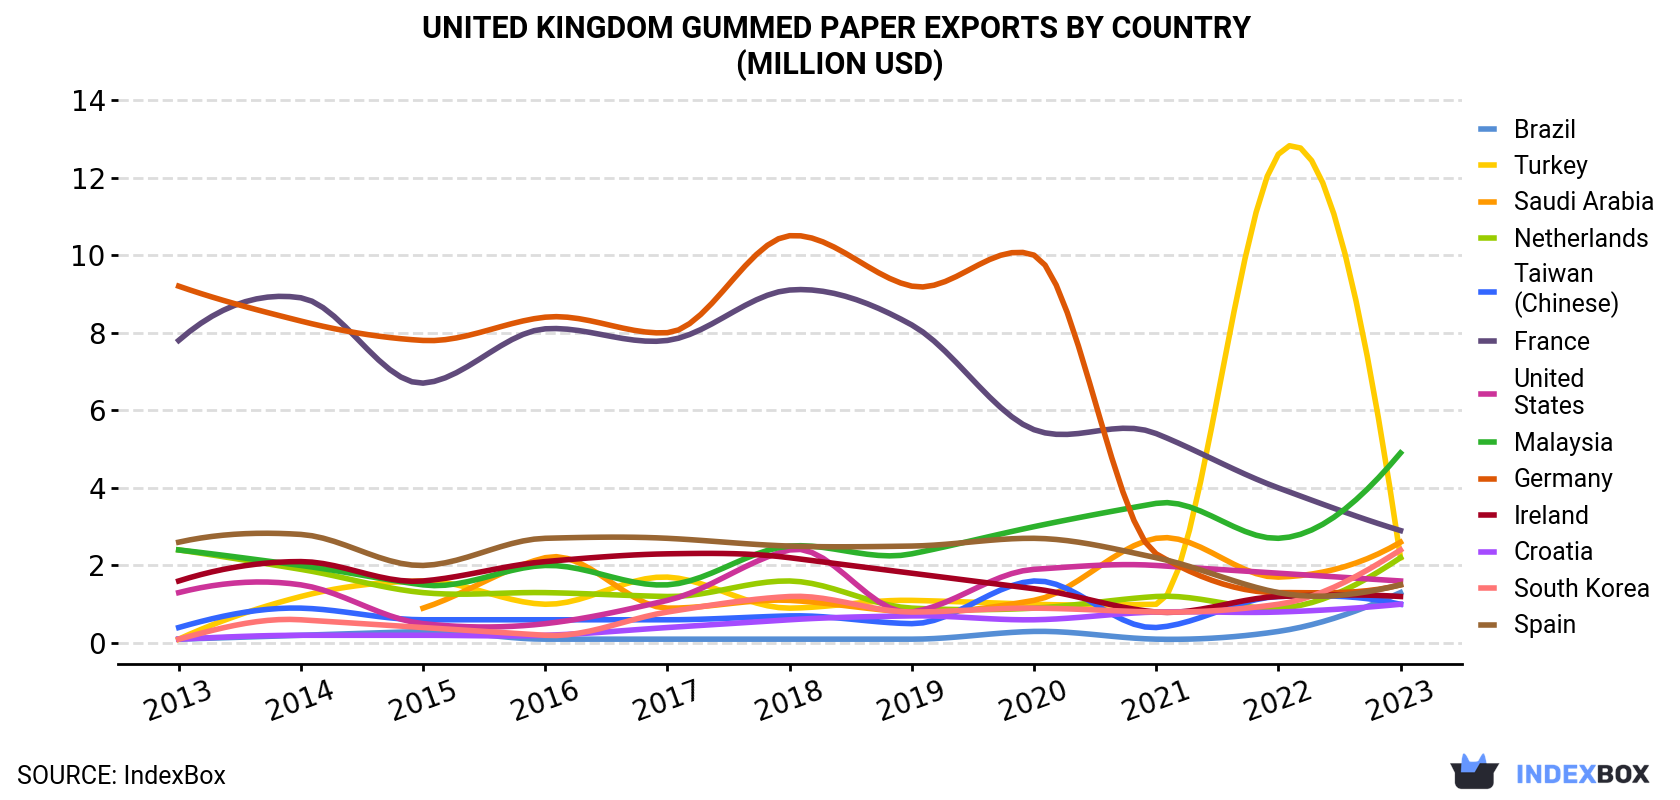 United Kingdom Gummed Paper Exports By Country (Million USD)